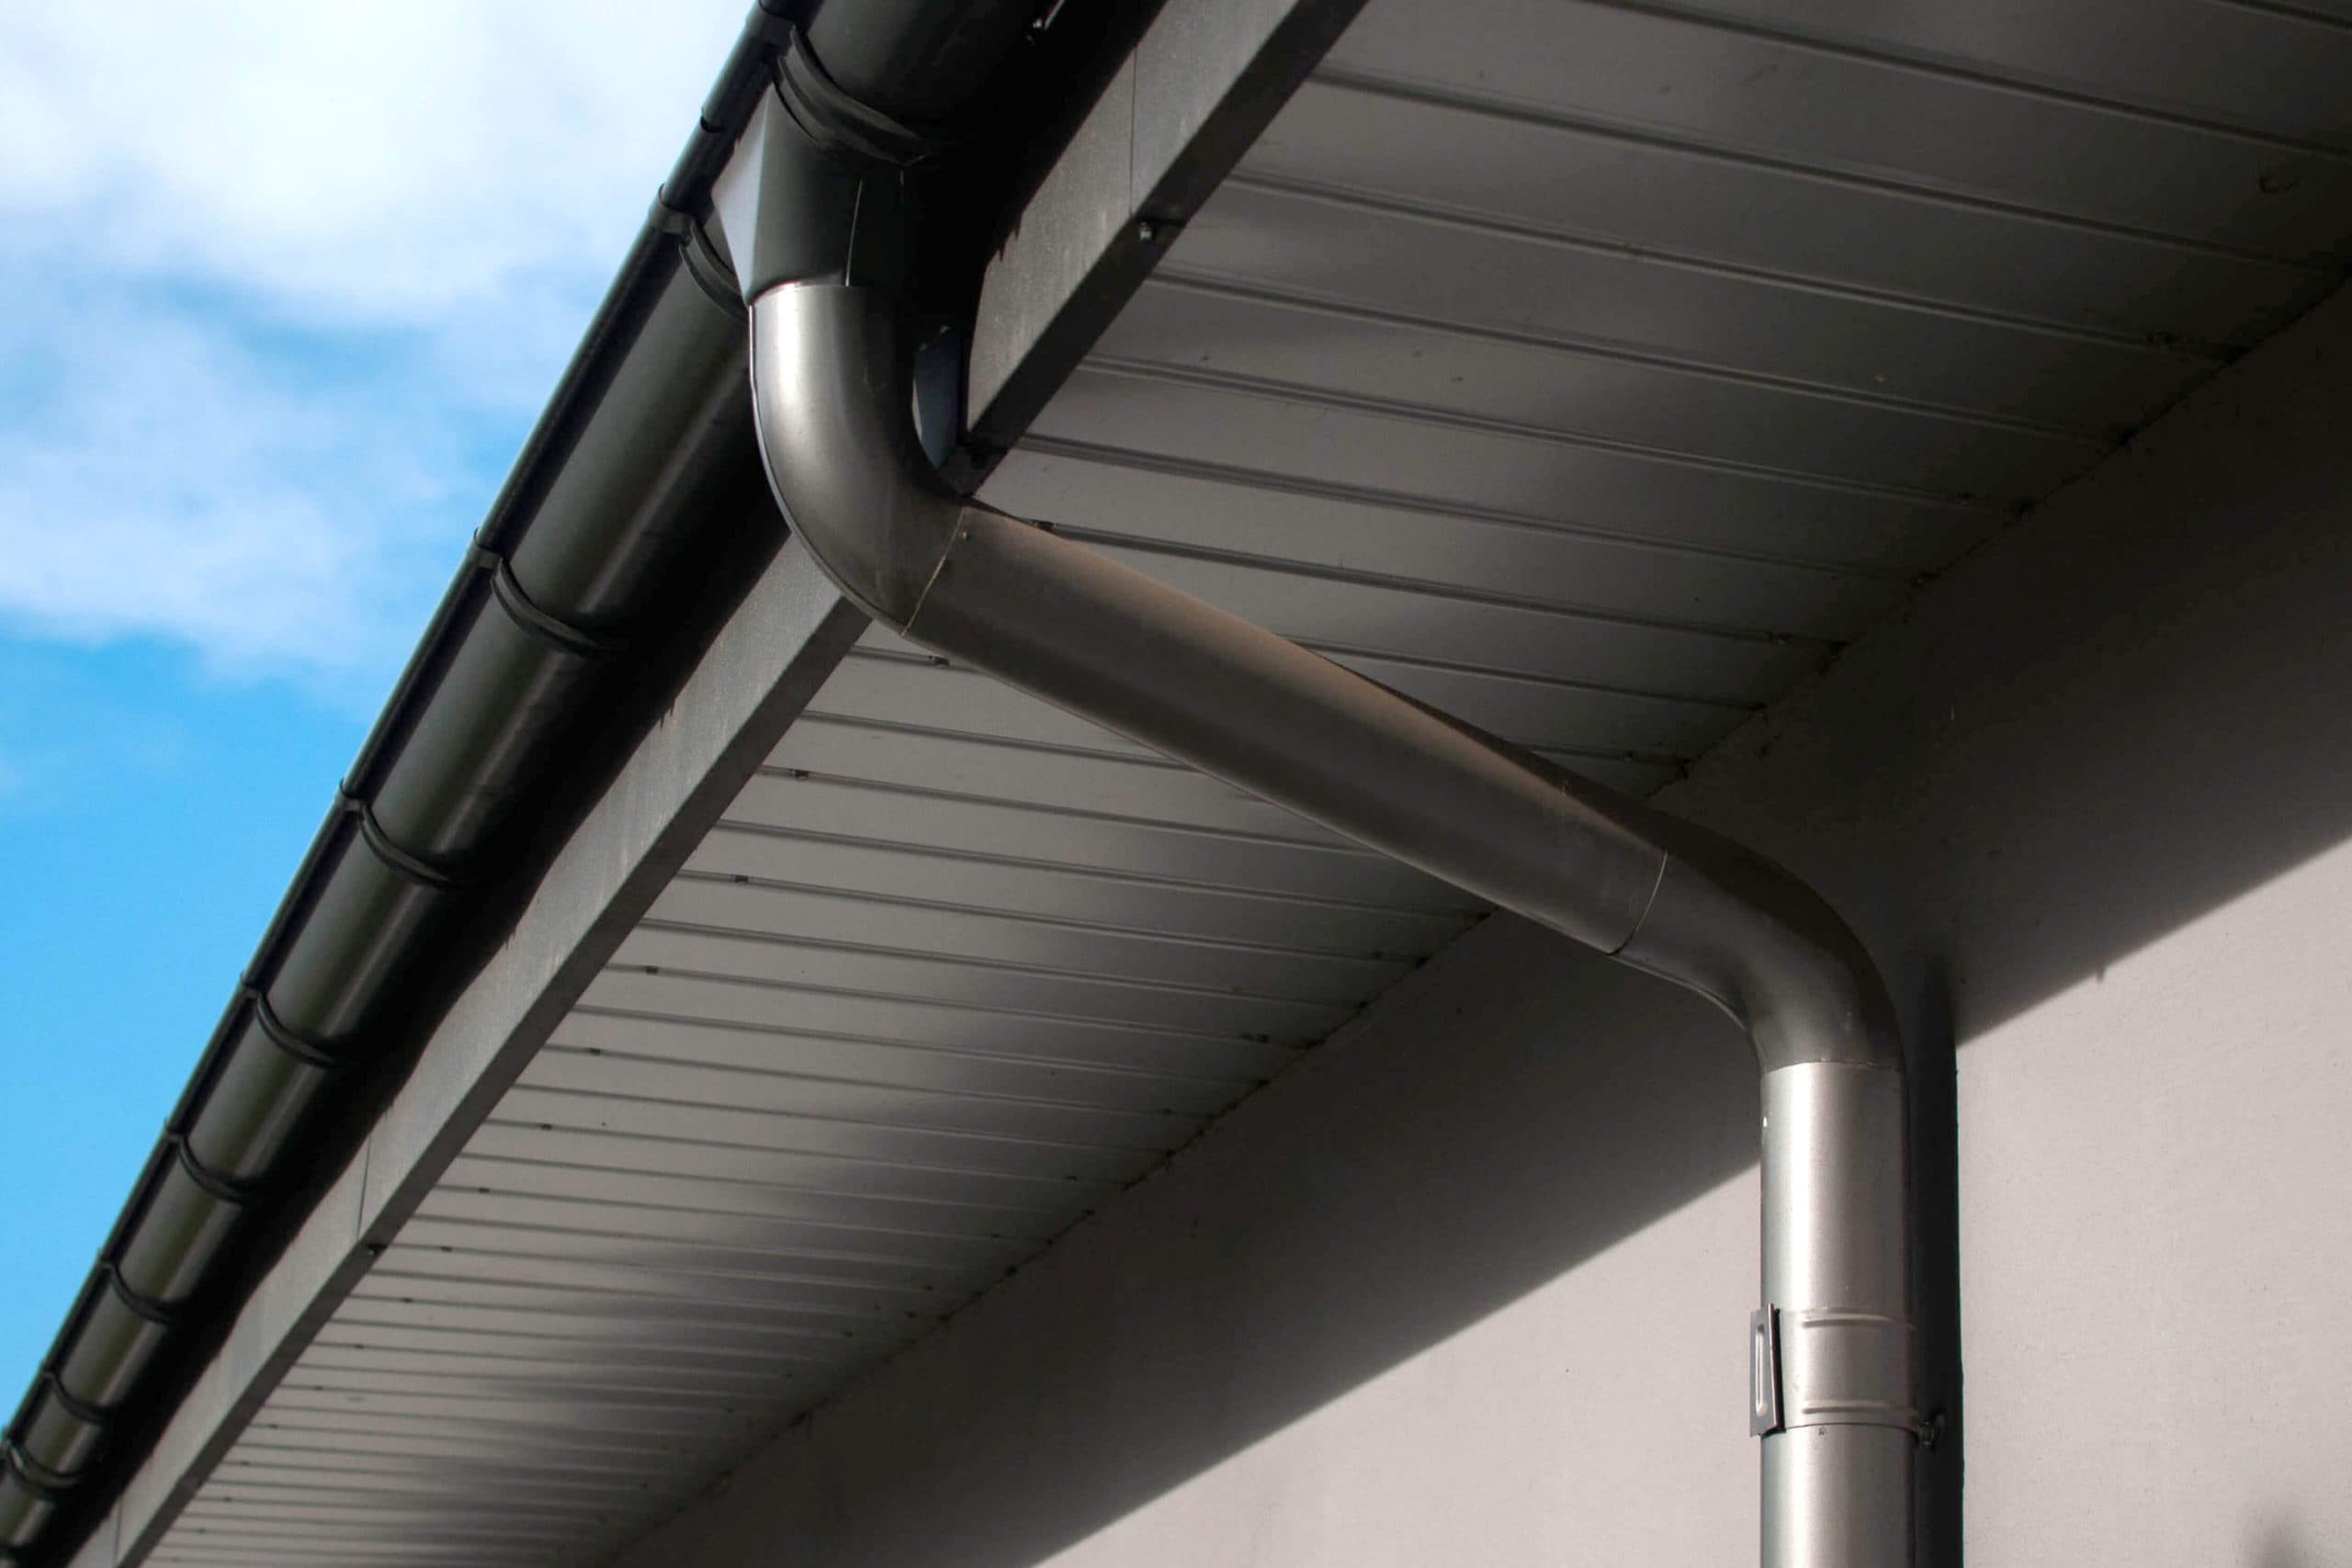 Reliable and affordable Galvanized gutters installation in Cary